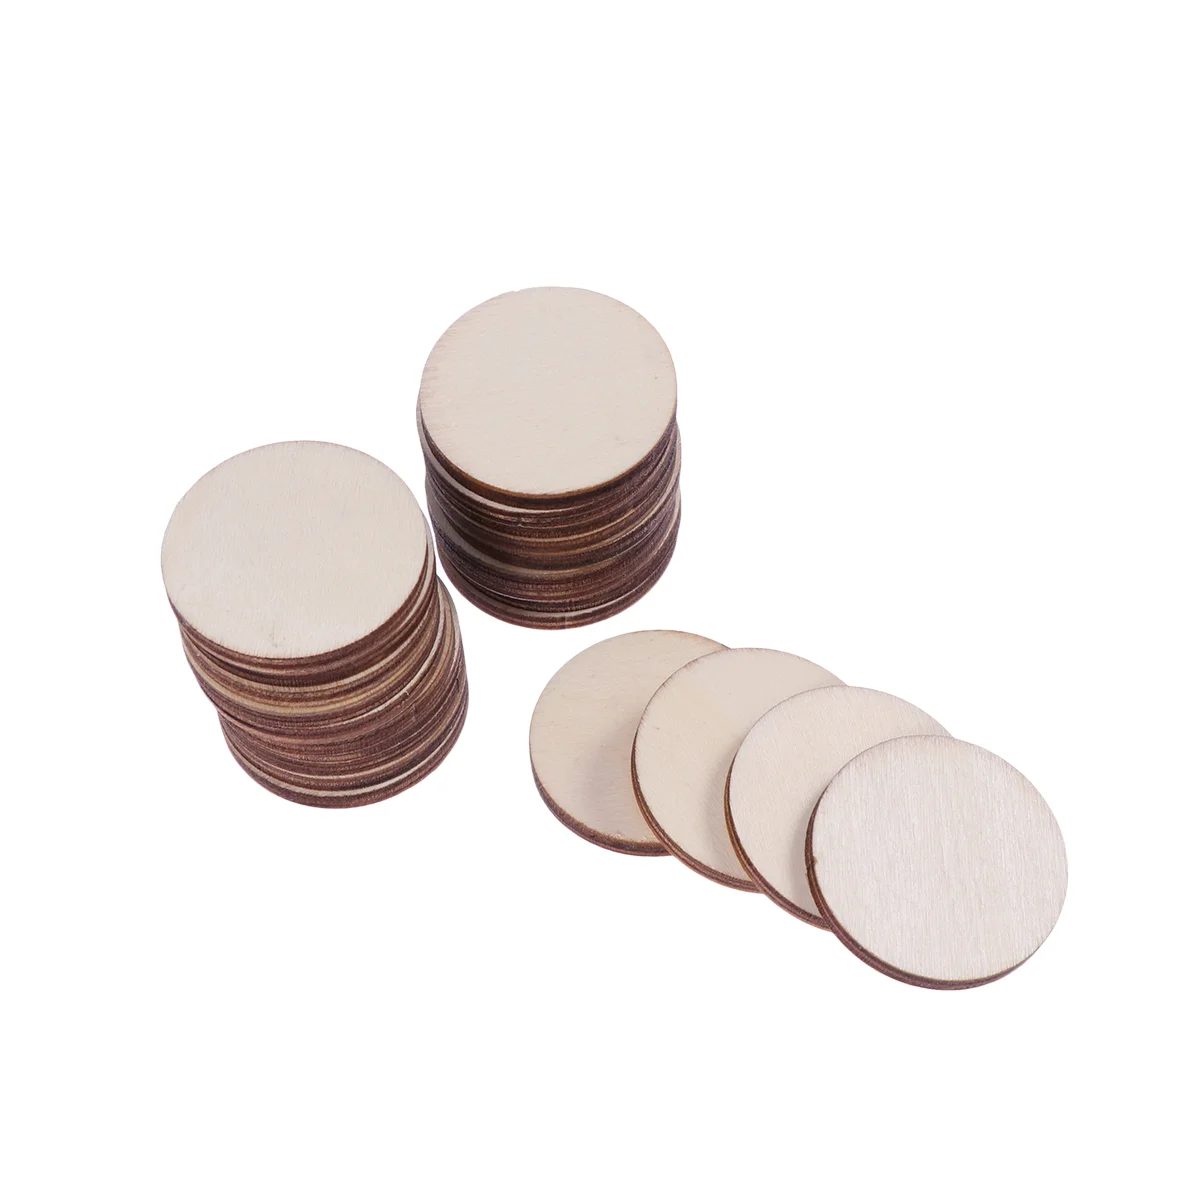 

Wood Wooden Round Pieces Piece Unfinished Craft Circles Blank Crafts Woods Slices Cutout Discs Slice Diy Cutouts Shapes